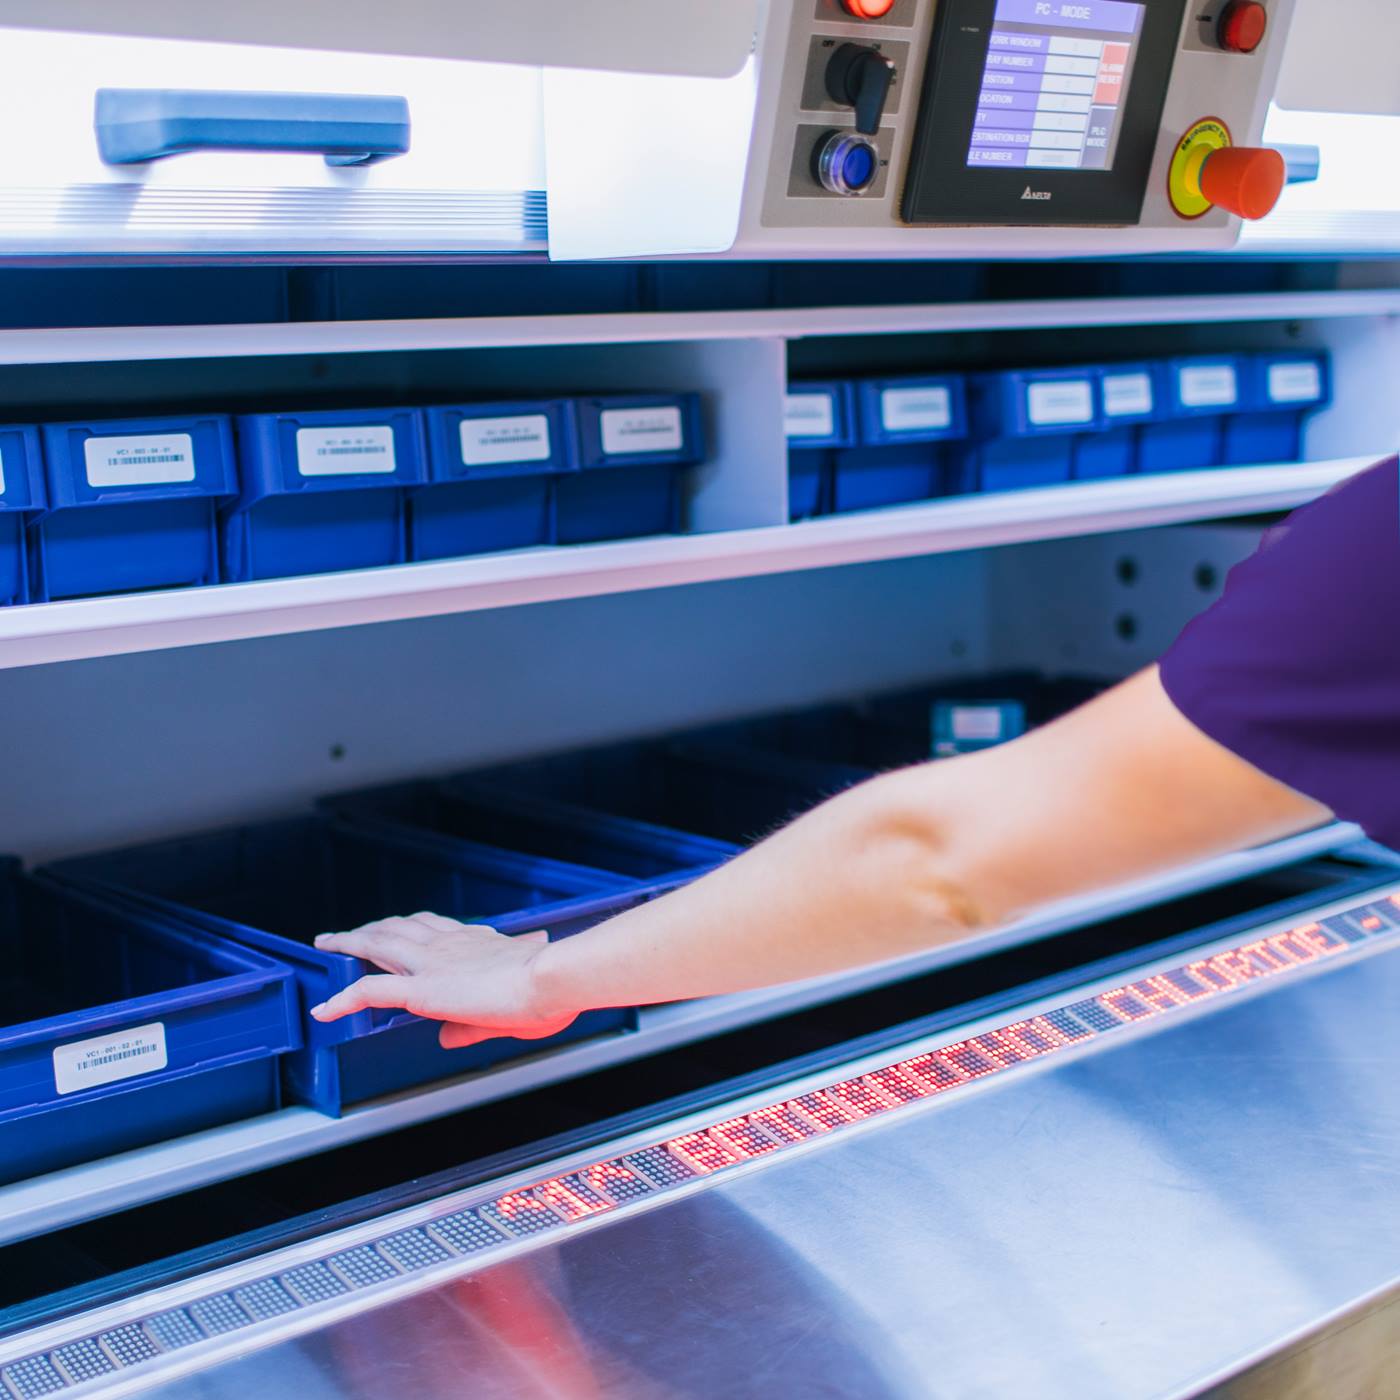 AutoCarousel semi-automated medication storage and retrieval system improves manual labor intensive processes